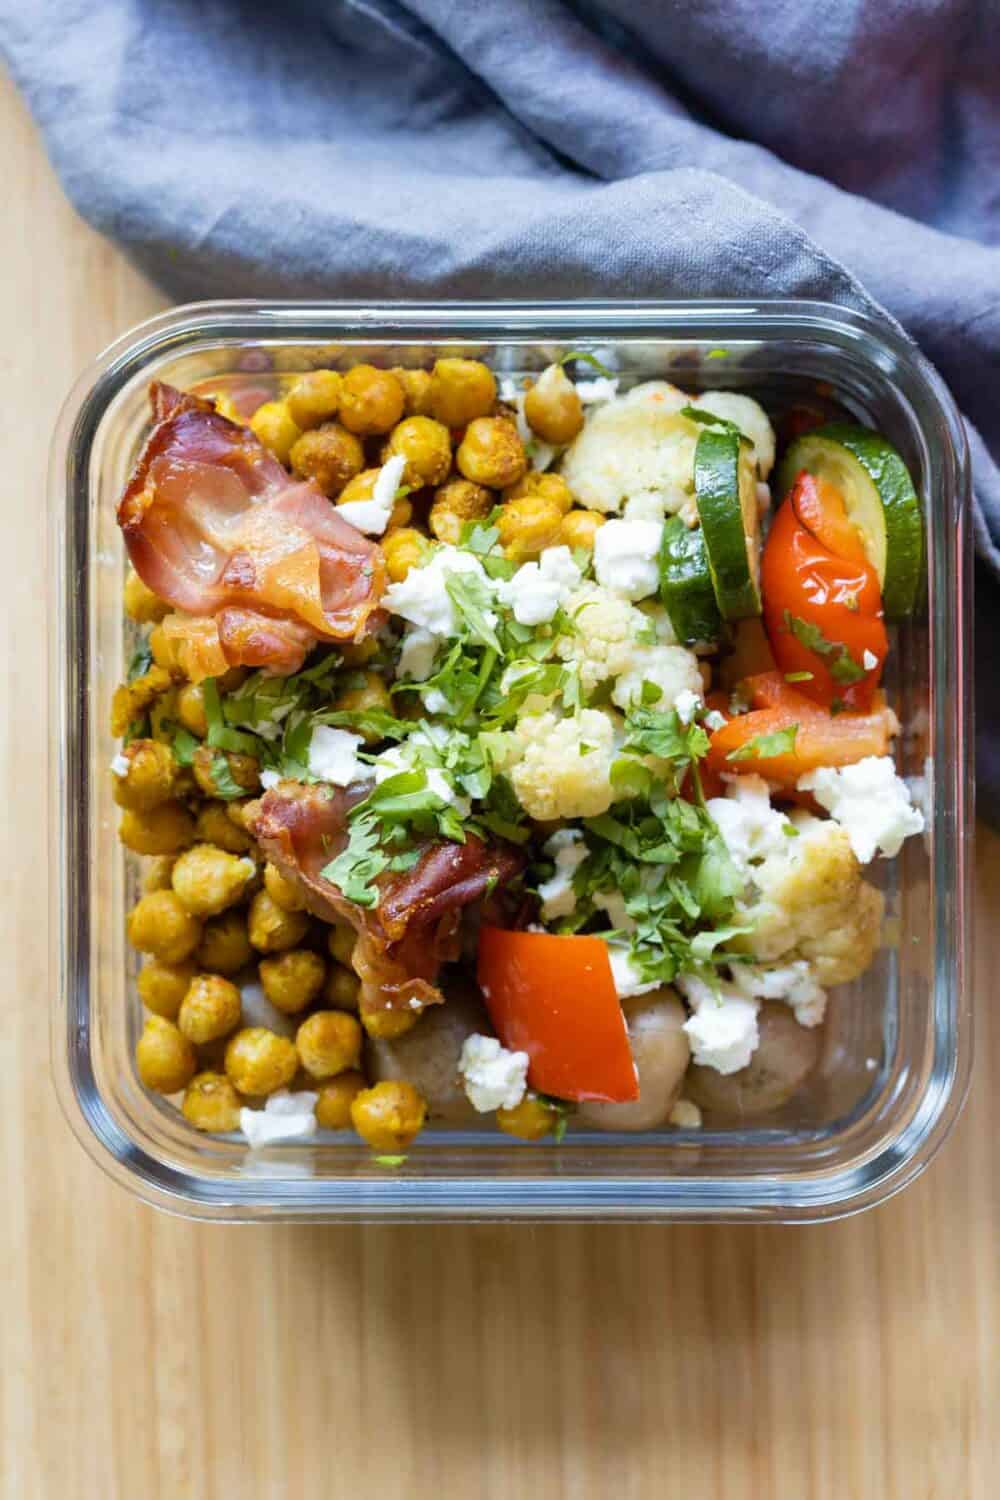 Glass meal prep container filled with chickpeas, vegetables, and prosciutto.